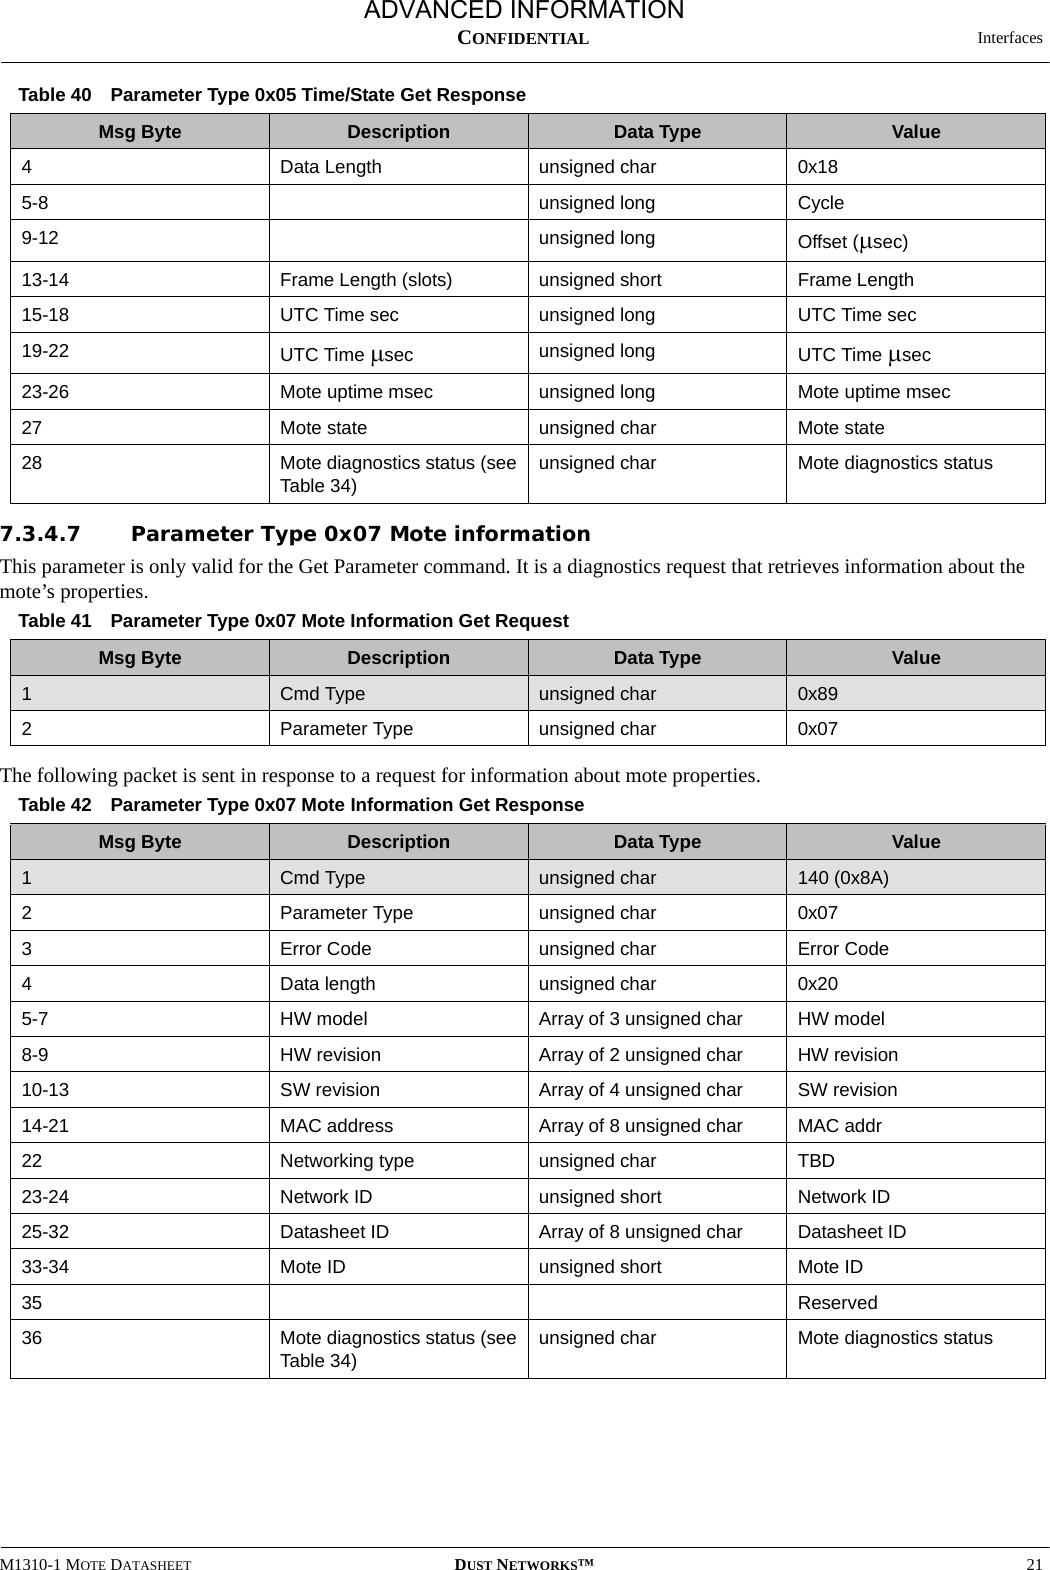  InterfacesM1310-1 MOTE DATASHEET DUST NETWORKS™21CONFIDENTIAL7.3.4.7 Parameter Type 0x07 Mote informationThis parameter is only valid for the Get Parameter command. It is a diagnostics request that retrieves information about the mote’s properties.The following packet is sent in response to a request for information about mote properties.4Data Length unsigned char 0x185-8 unsigned long Cycle9-12 unsigned long Offset (µsec)13-14 Frame Length (slots) unsigned short Frame Length15-18 UTC Time sec unsigned long UTC Time sec 19-22 UTC Time µsec unsigned long UTC Time µsec 23-26 Mote uptime msec unsigned long Mote uptime msec 27 Mote state unsigned char Mote state28 Mote diagnostics status (see Table 34)unsigned char Mote diagnostics statusTable 41 Parameter Type 0x07 Mote Information Get RequestMsg Byte Description Data Type Value1  Cmd Type unsigned char 0x892Parameter Type unsigned char 0x07Table 42 Parameter Type 0x07 Mote Information Get ResponseMsg Byte Description Data Type Value1  Cmd Type unsigned char 140 (0x8A)2Parameter Type unsigned char 0x073Error Code unsigned char Error Code 4Data length unsigned char 0x205-7 HW model Array of 3 unsigned char HW model 8-9 HW revision Array of 2 unsigned char HW revision10-13 SW revision Array of 4 unsigned char SW revision 14-21 MAC address Array of 8 unsigned char MAC addr 22 Networking type unsigned char TBD23-24 Network ID unsigned short Network ID 25-32 Datasheet ID Array of 8 unsigned char Datasheet ID 33-34 Mote ID unsigned short Mote ID35 Reserved36 Mote diagnostics status (see Table 34)unsigned char Mote diagnostics statusTable 40  Parameter Type 0x05 Time/State Get ResponseMsg Byte Description Data Type ValueADVANCED INFORMATION